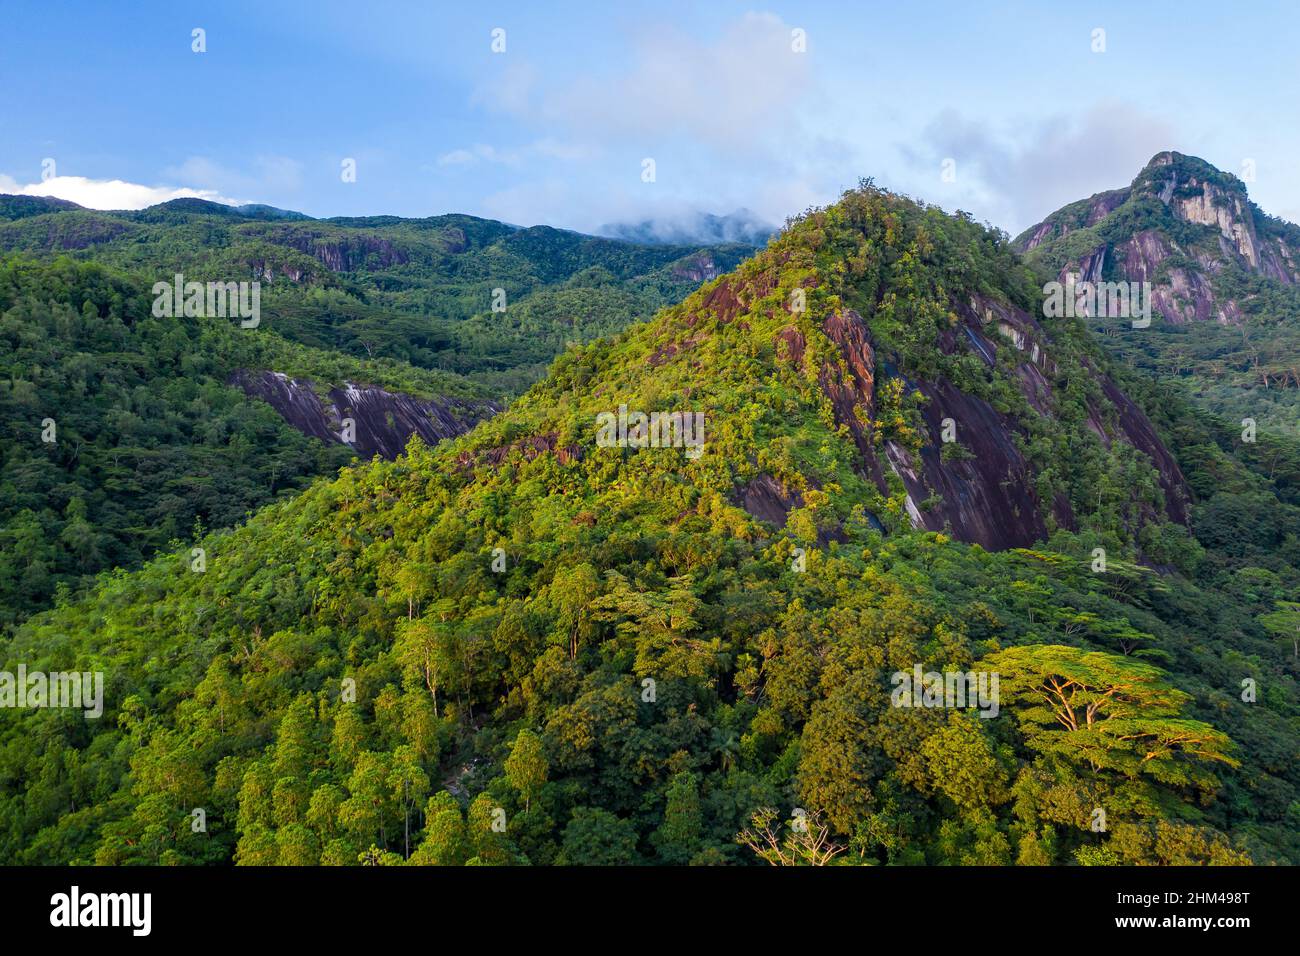 Morne Seychellois National Park aerial view from drone during sunset, golden hour, with lush tropical mountains, Mahe Island, Seychelles. Stock Photo